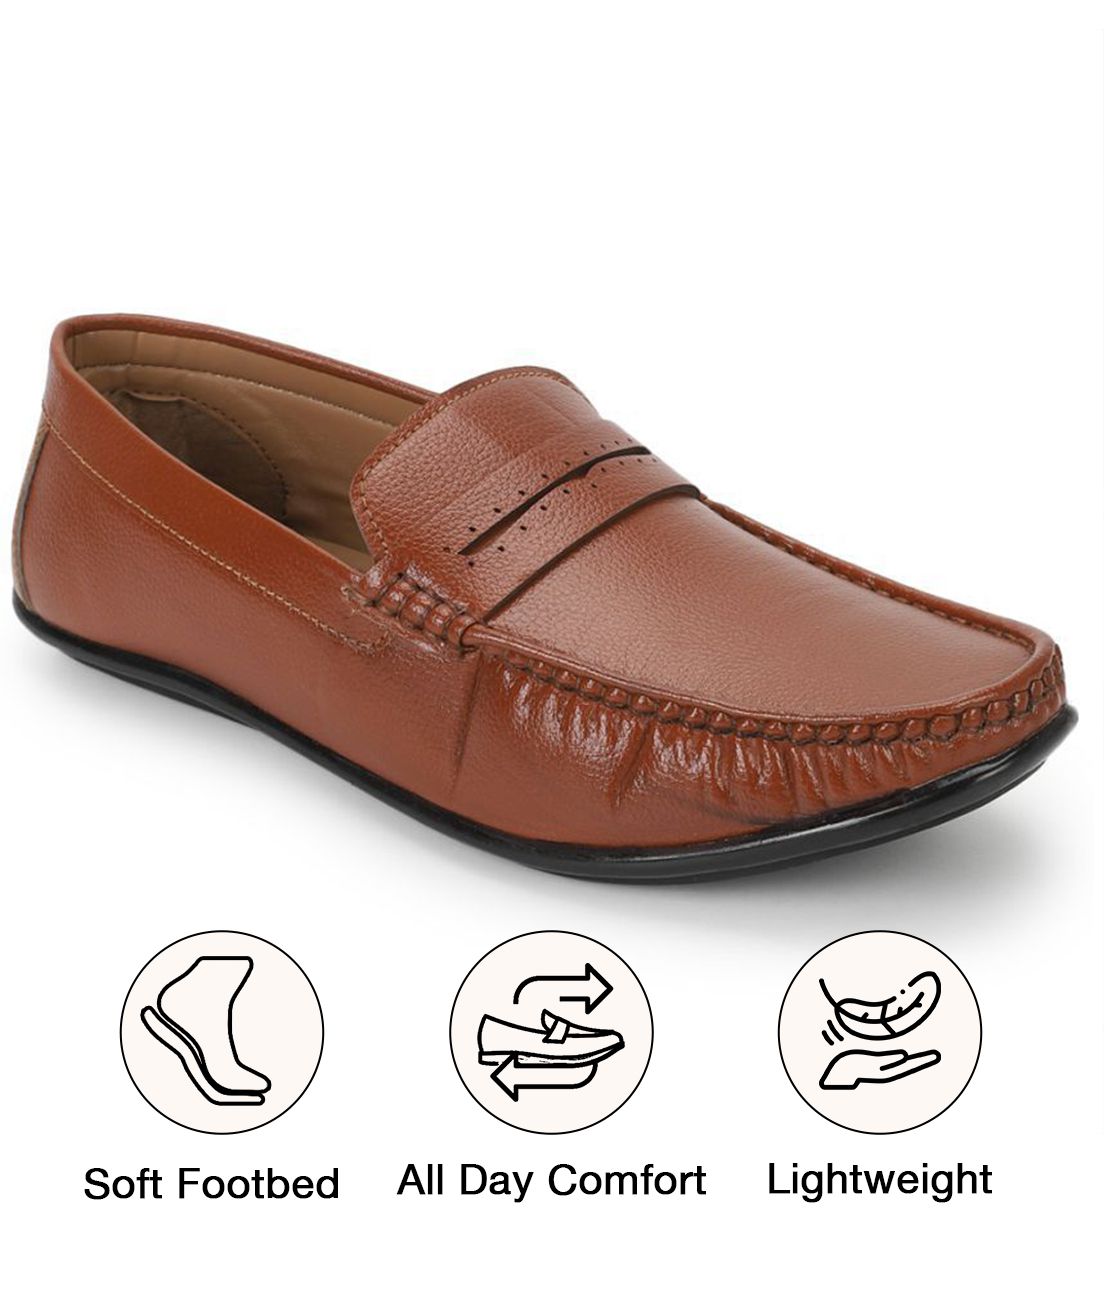     			UrbanMark Men Comfortable Faux Leather Slip On Loafers Shoes - Tan